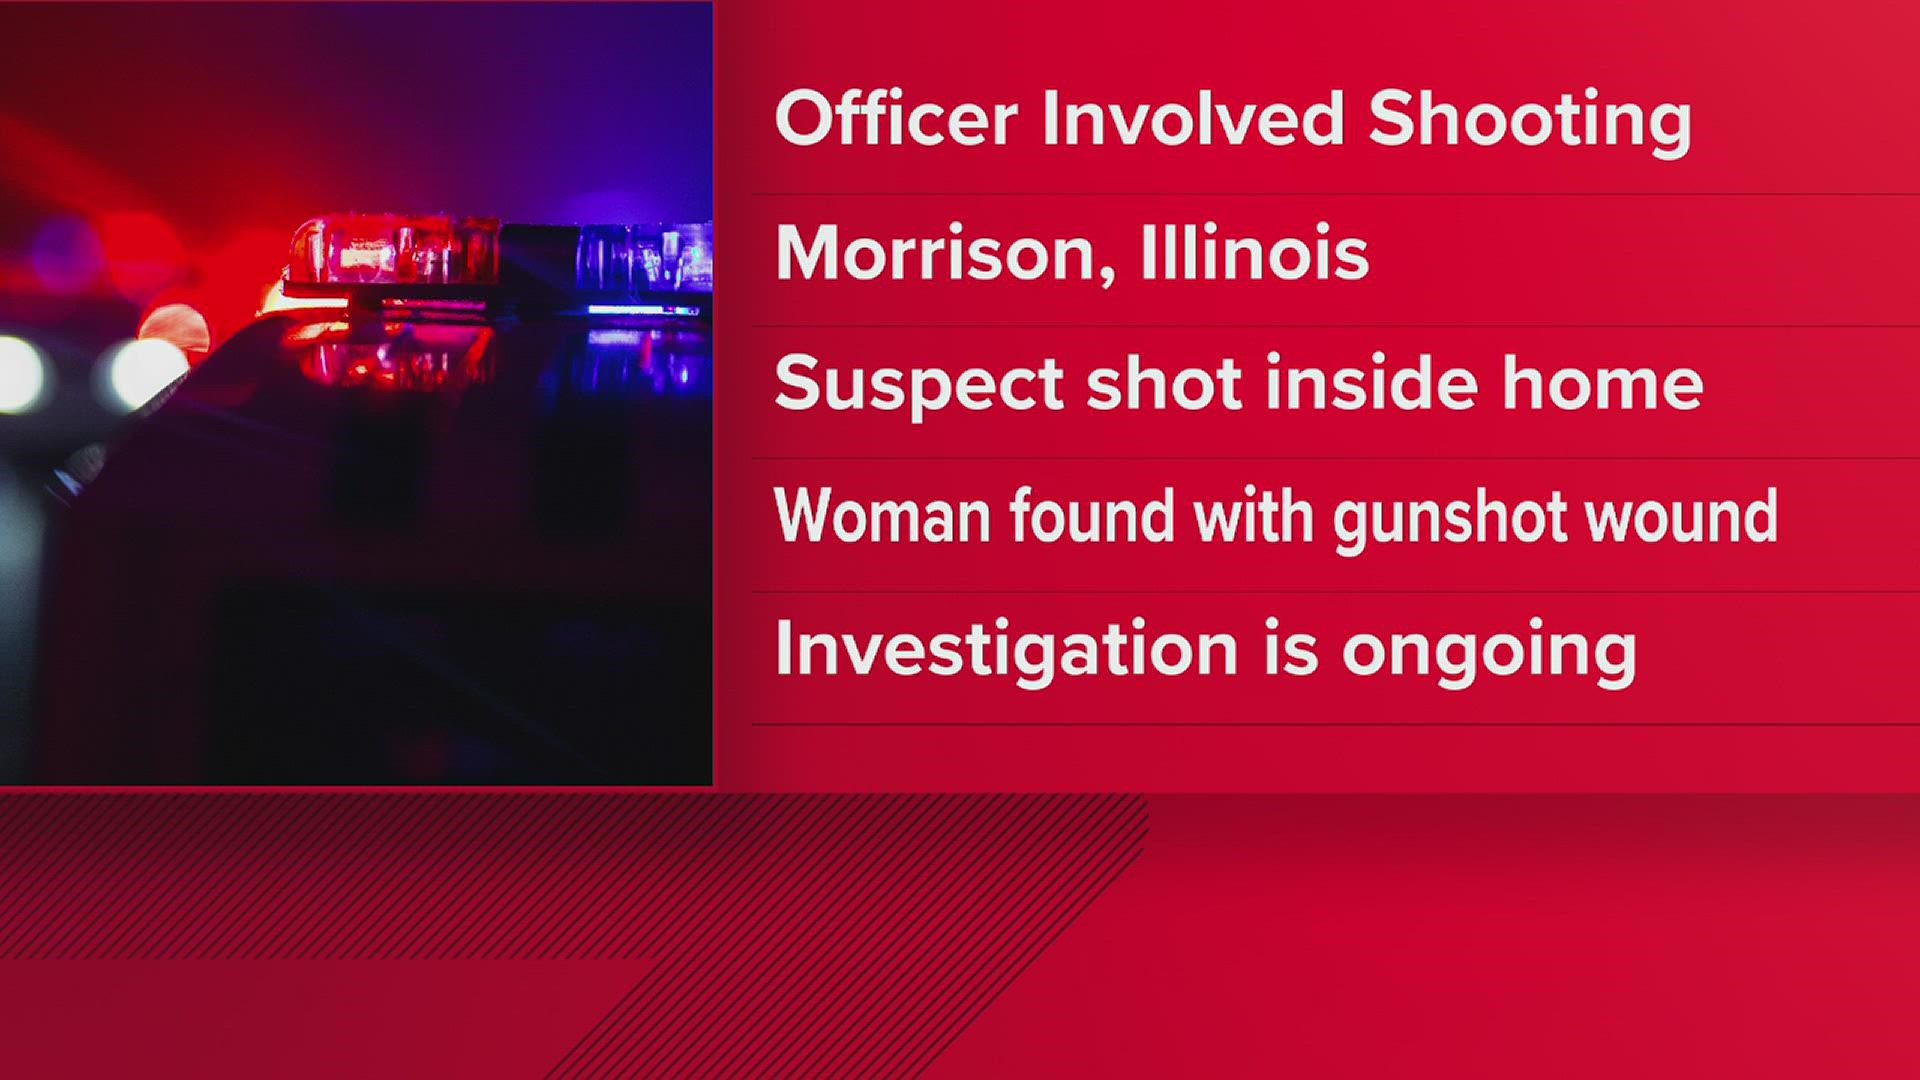 An officer shot the suspect after hearing gunfire during the execution of a search warrant at a Morrison, Illinois home.